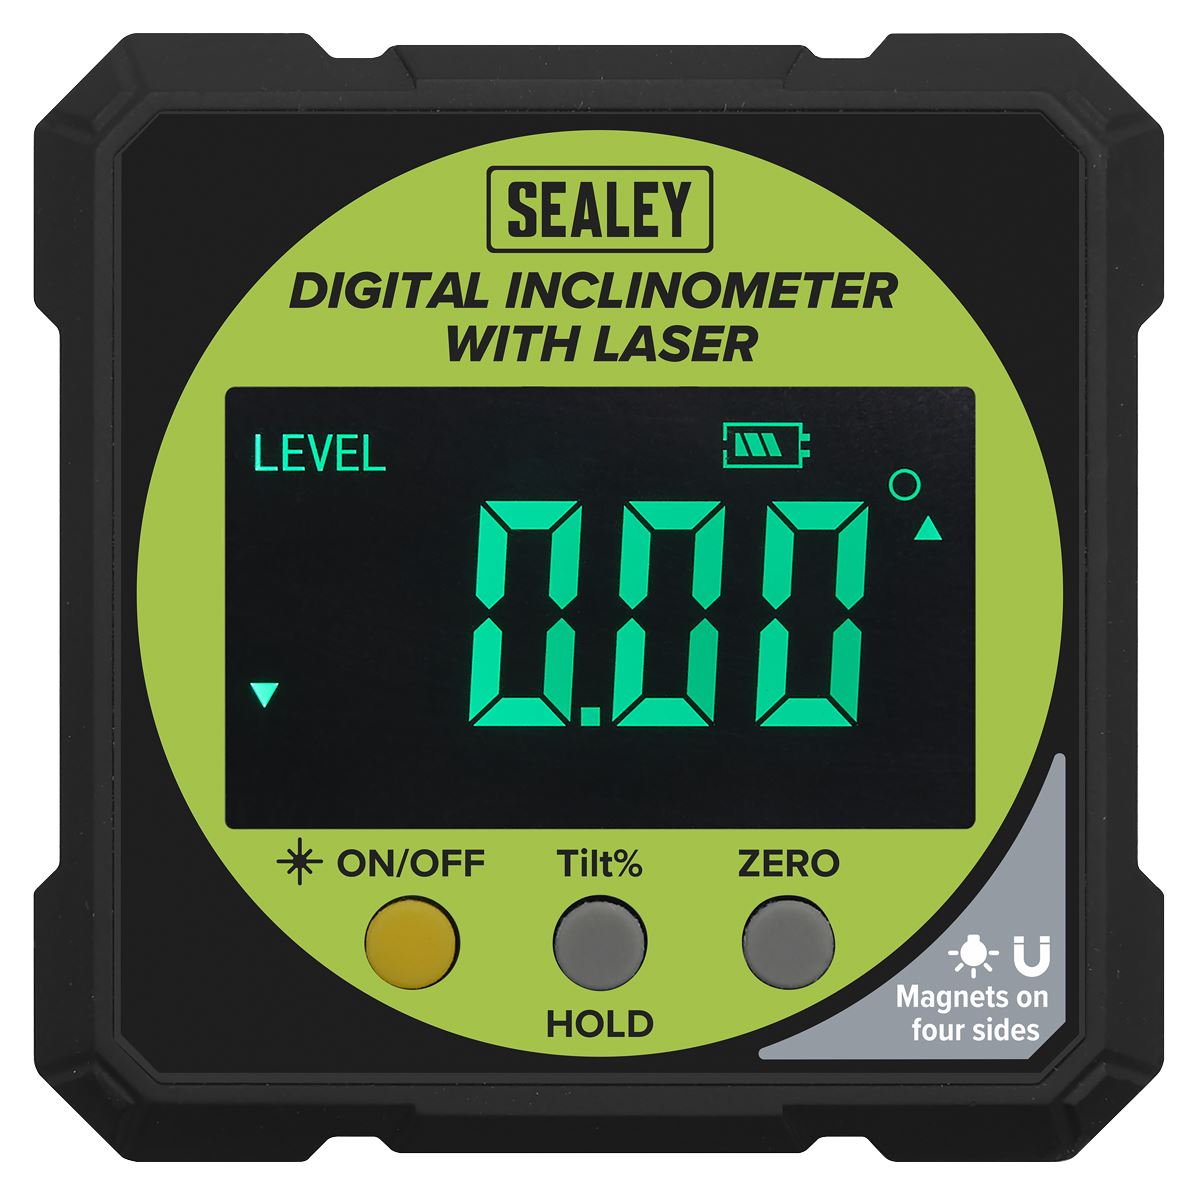 Sealey Inclinometer Digital with Laser